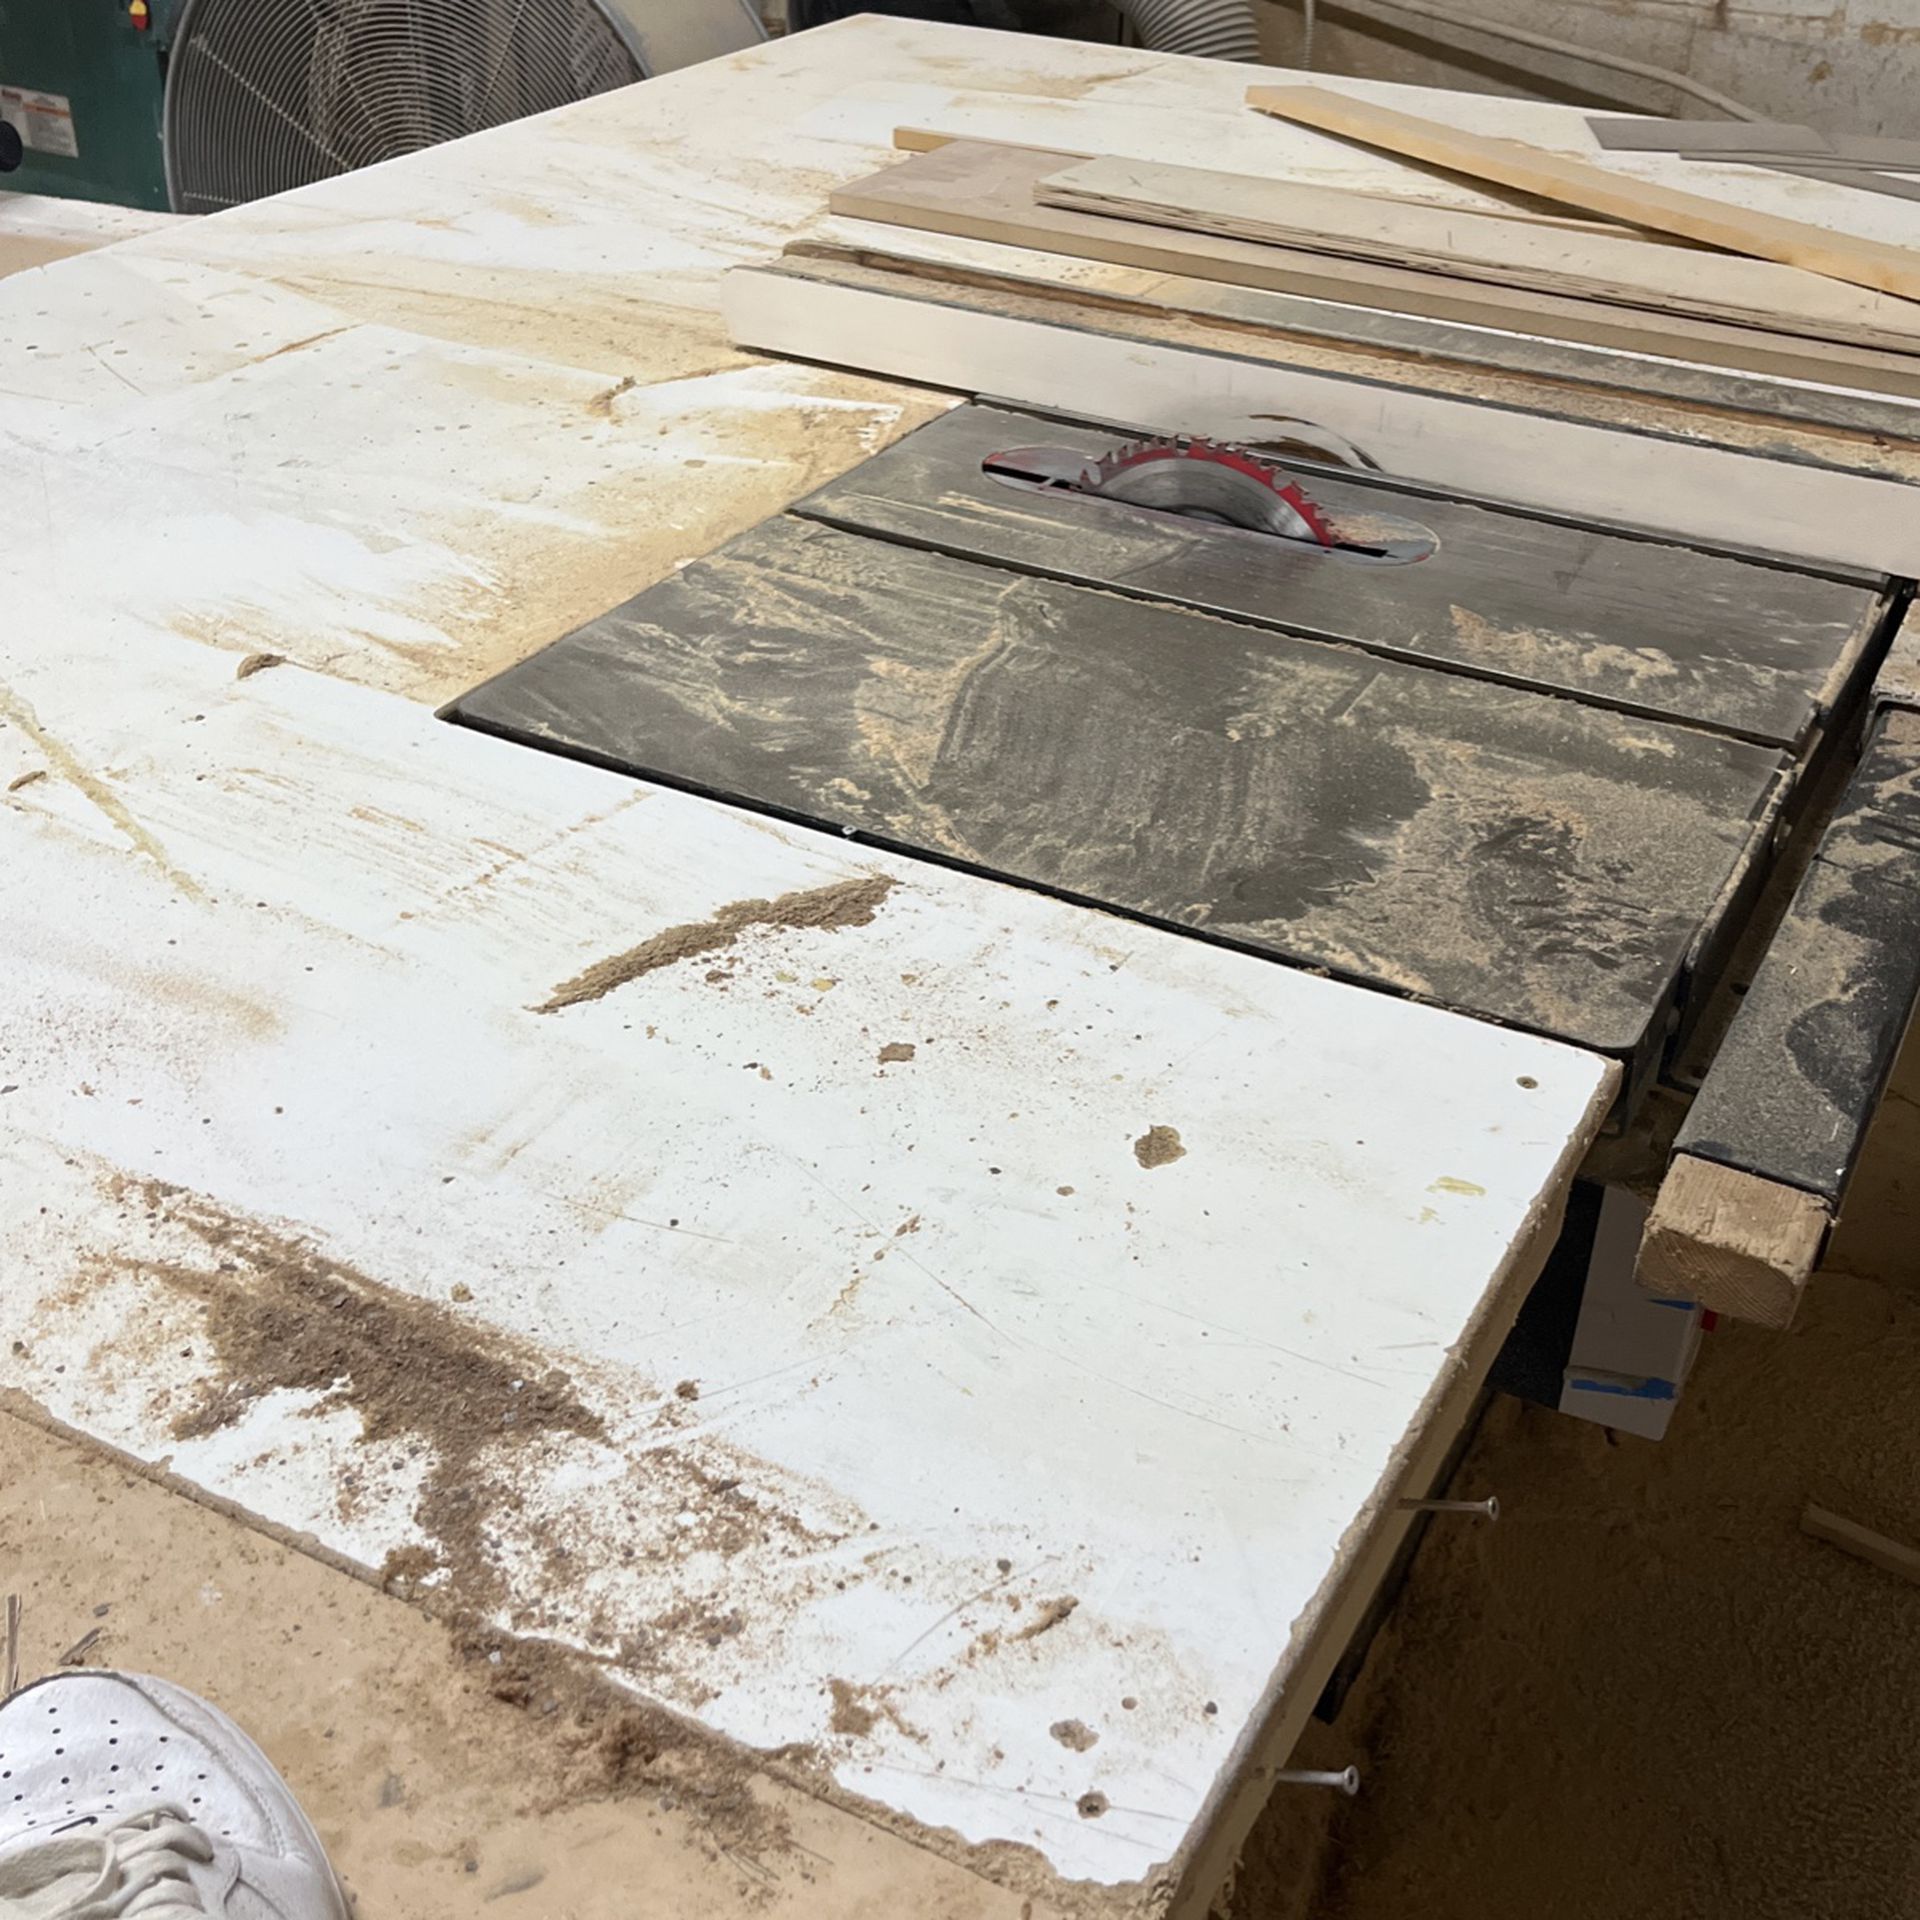 Grizzly Table saw